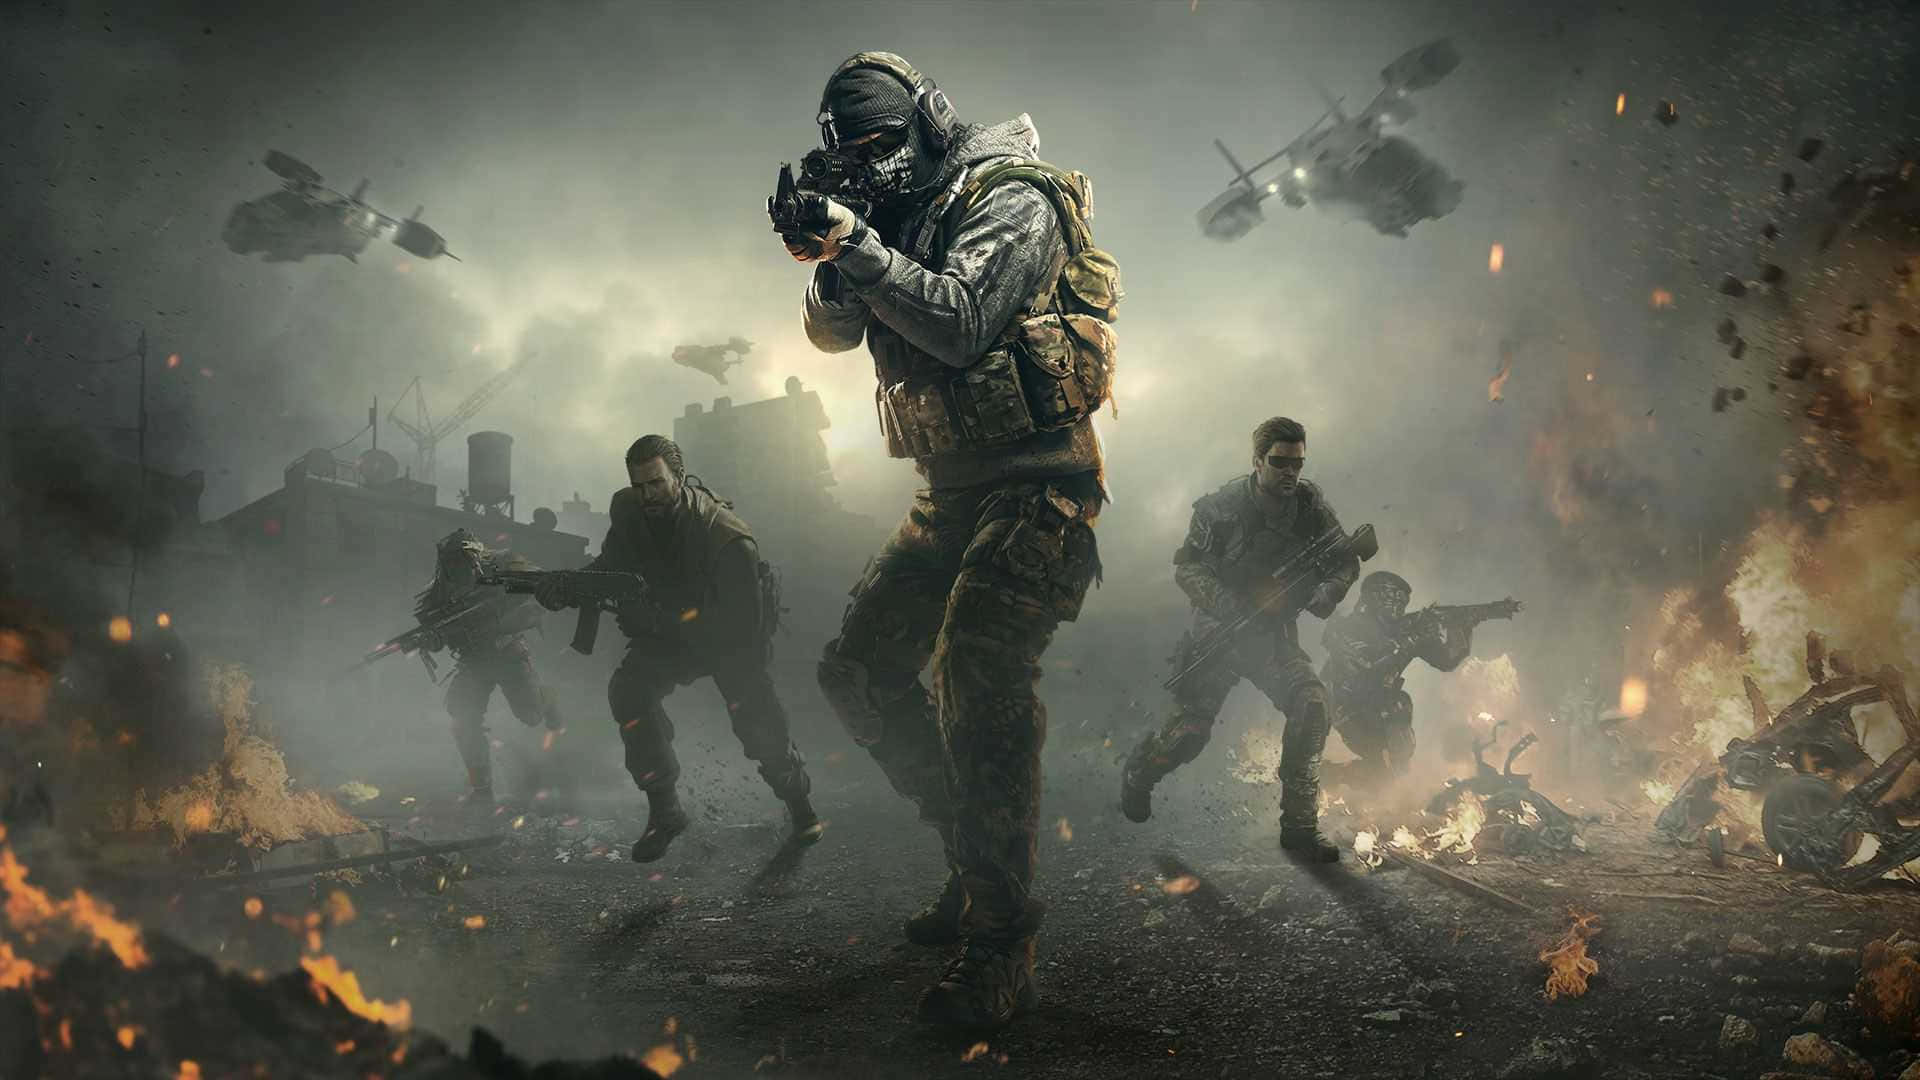 Team up with friends and take on thrilling missions in Call of Duty 2020 Wallpaper